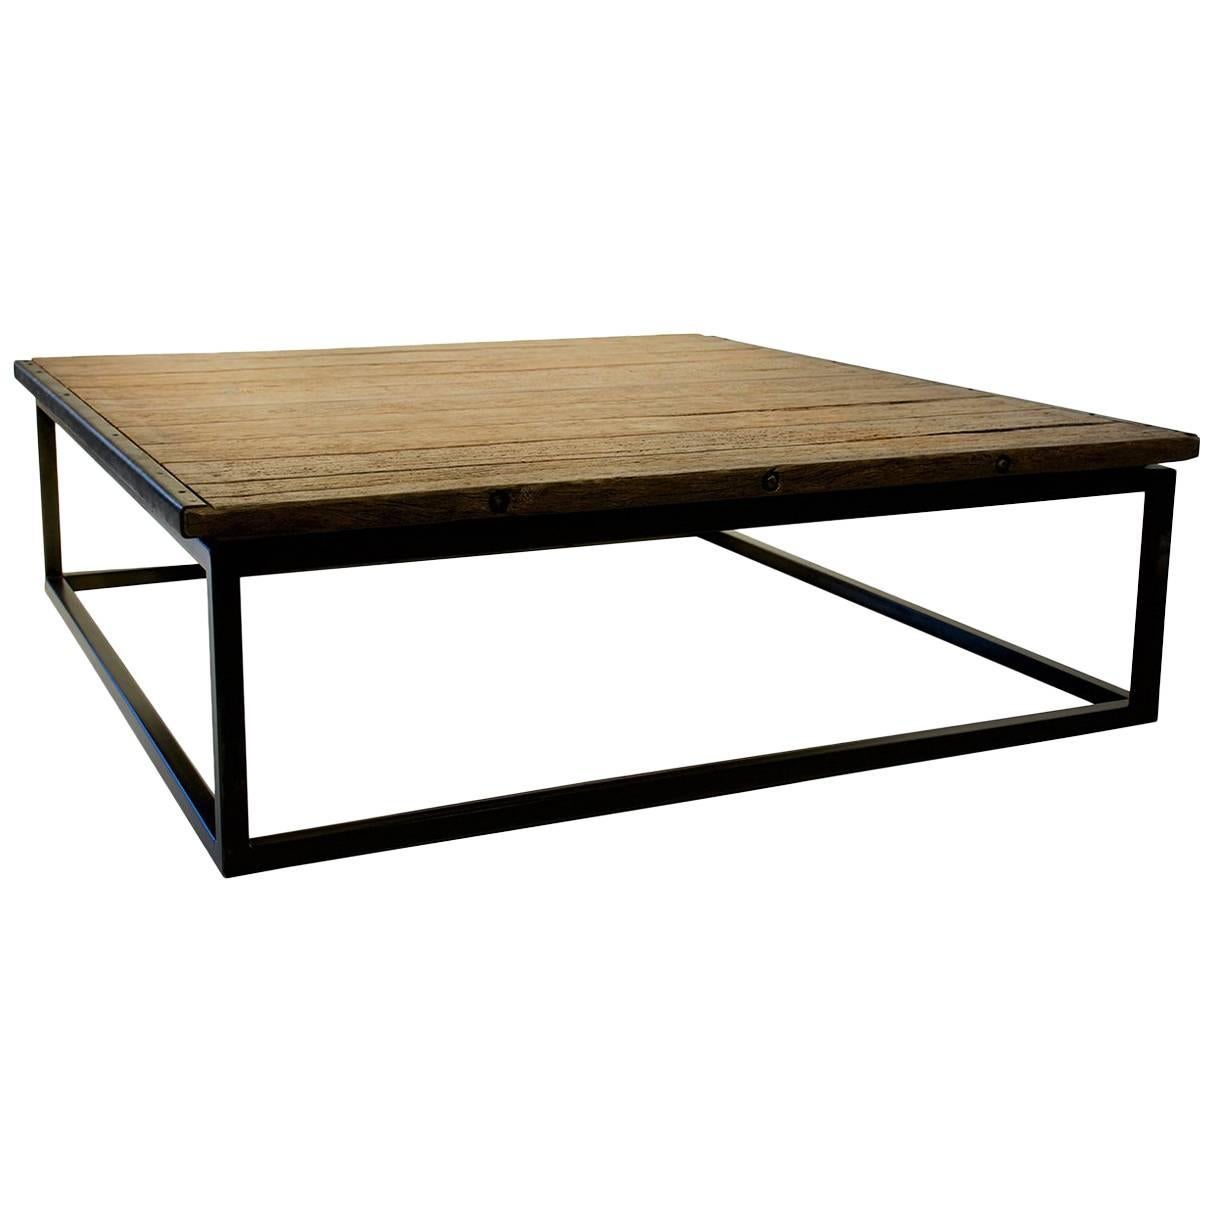 Belgian Baking Pallet Coffee Table with Steel Base